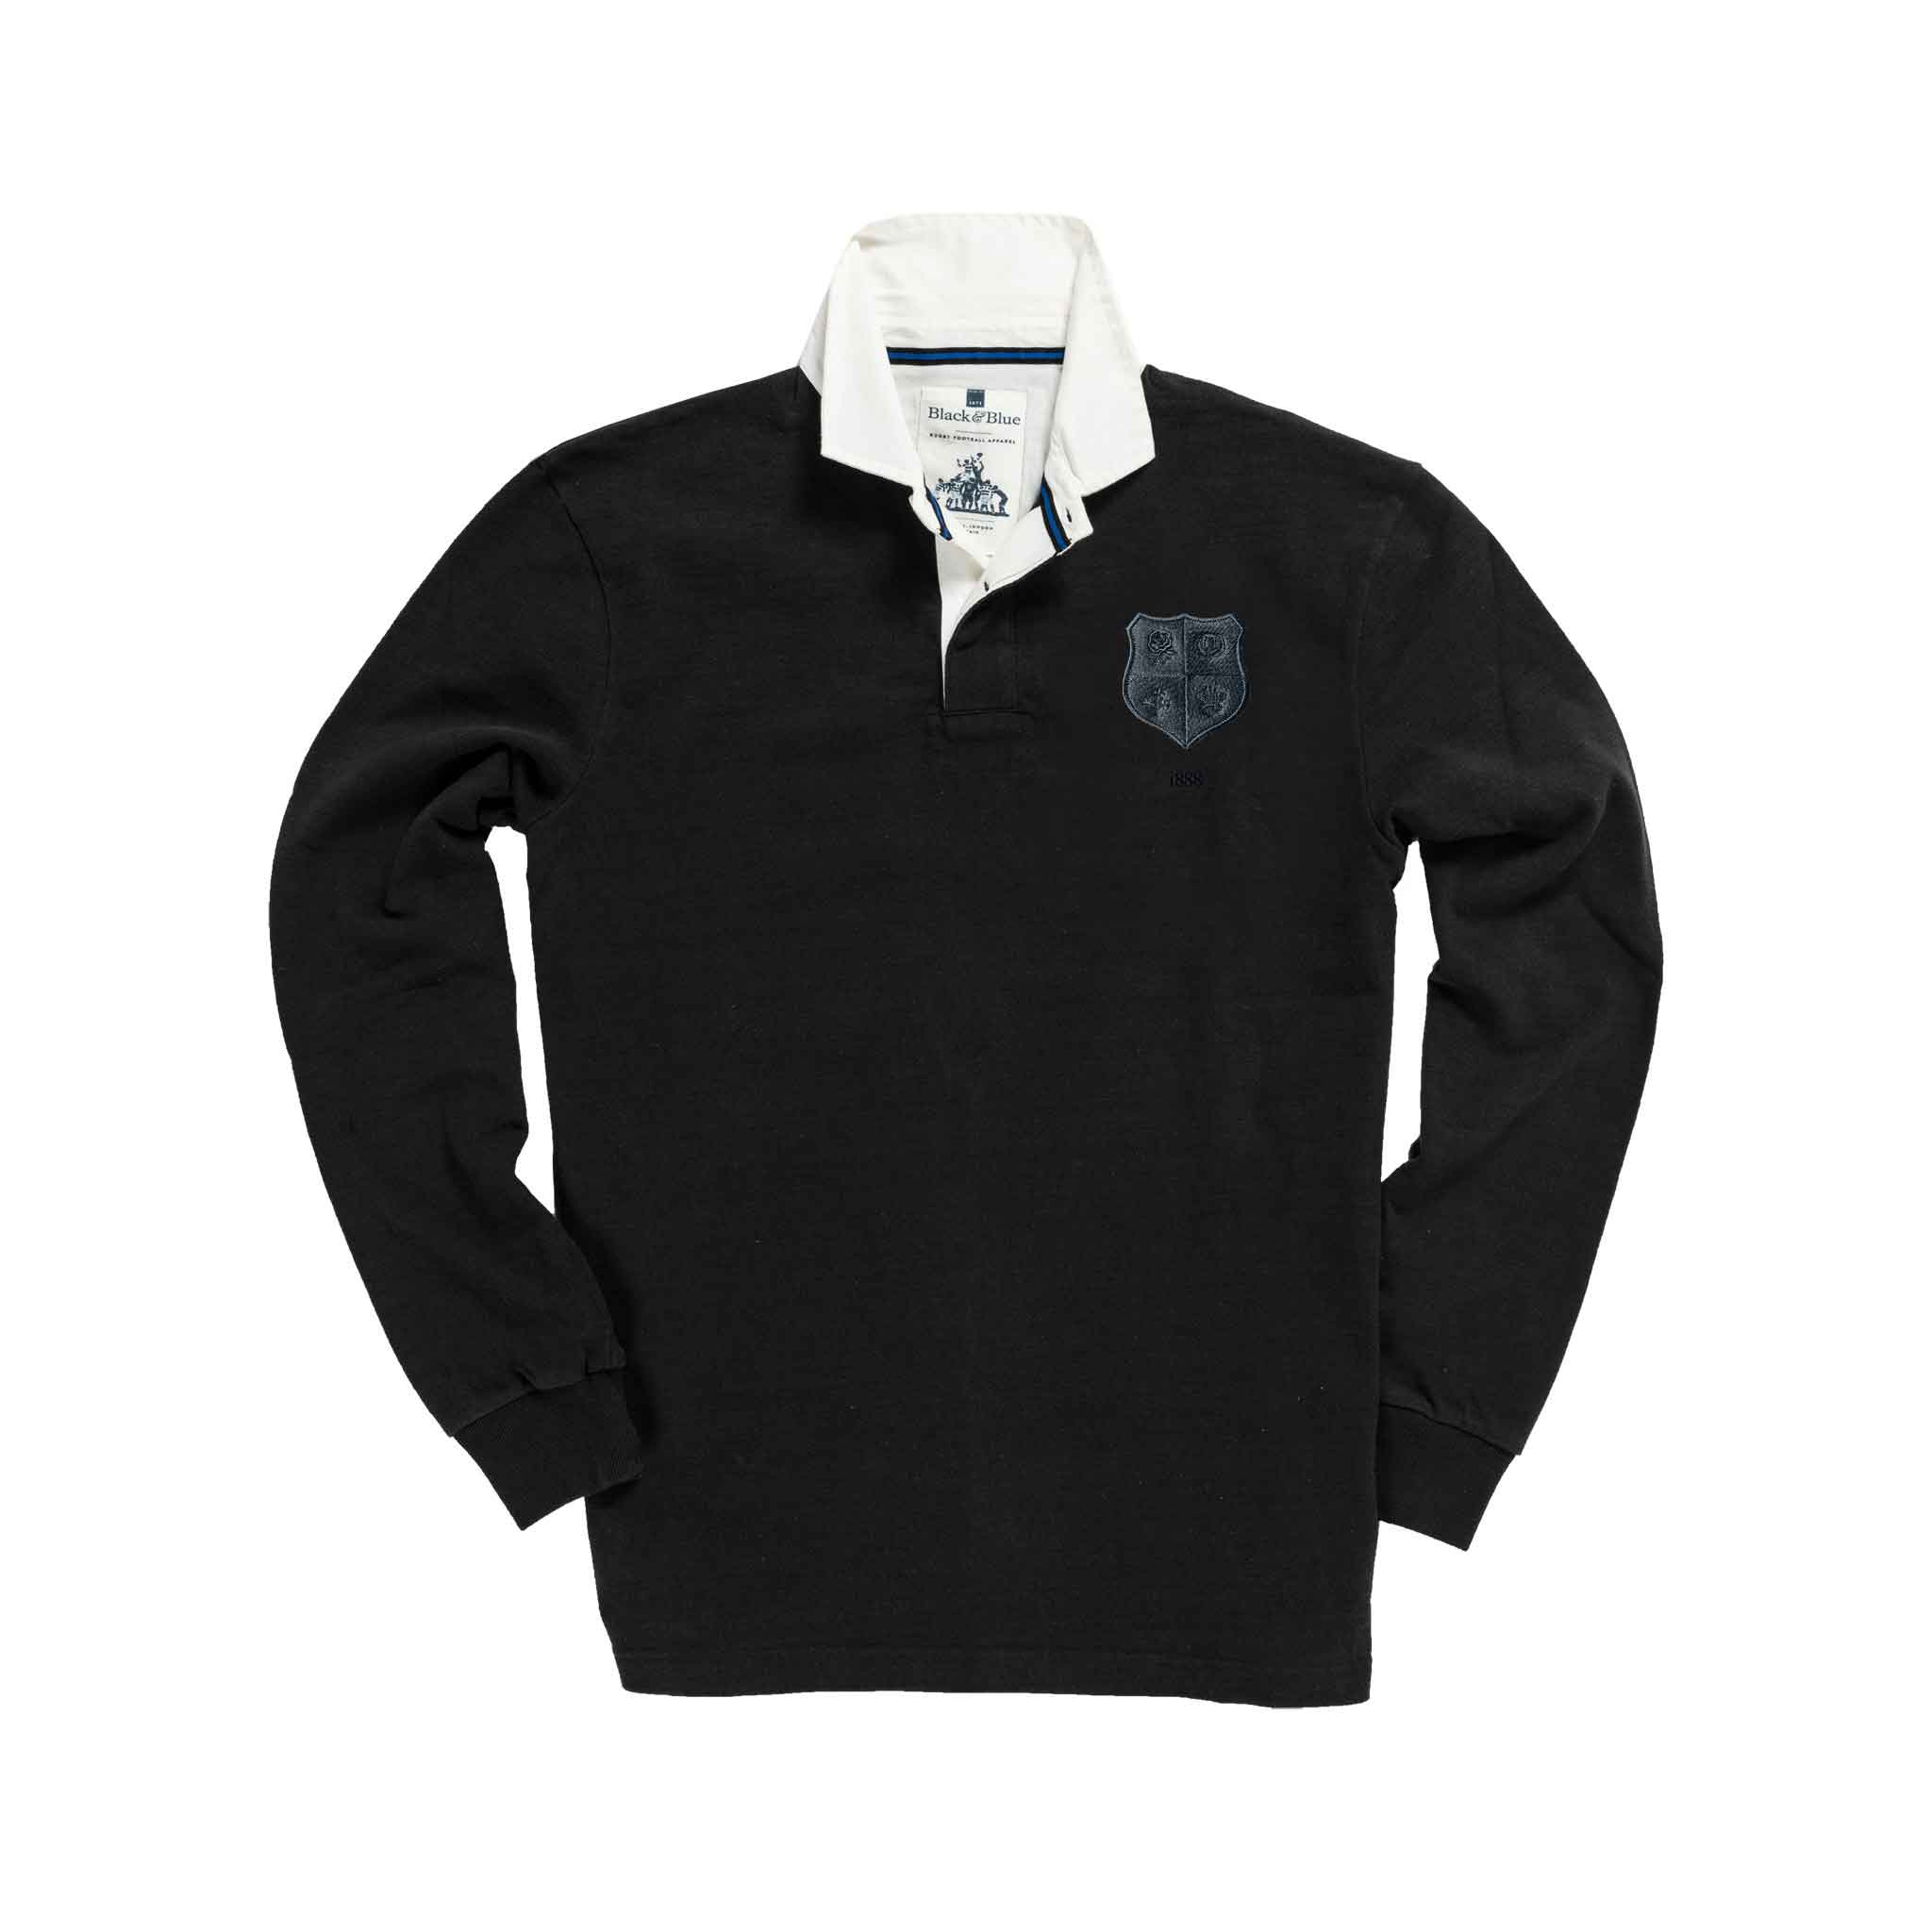 British and Irish Lions 1888 Rugby Shirt_BL_Front